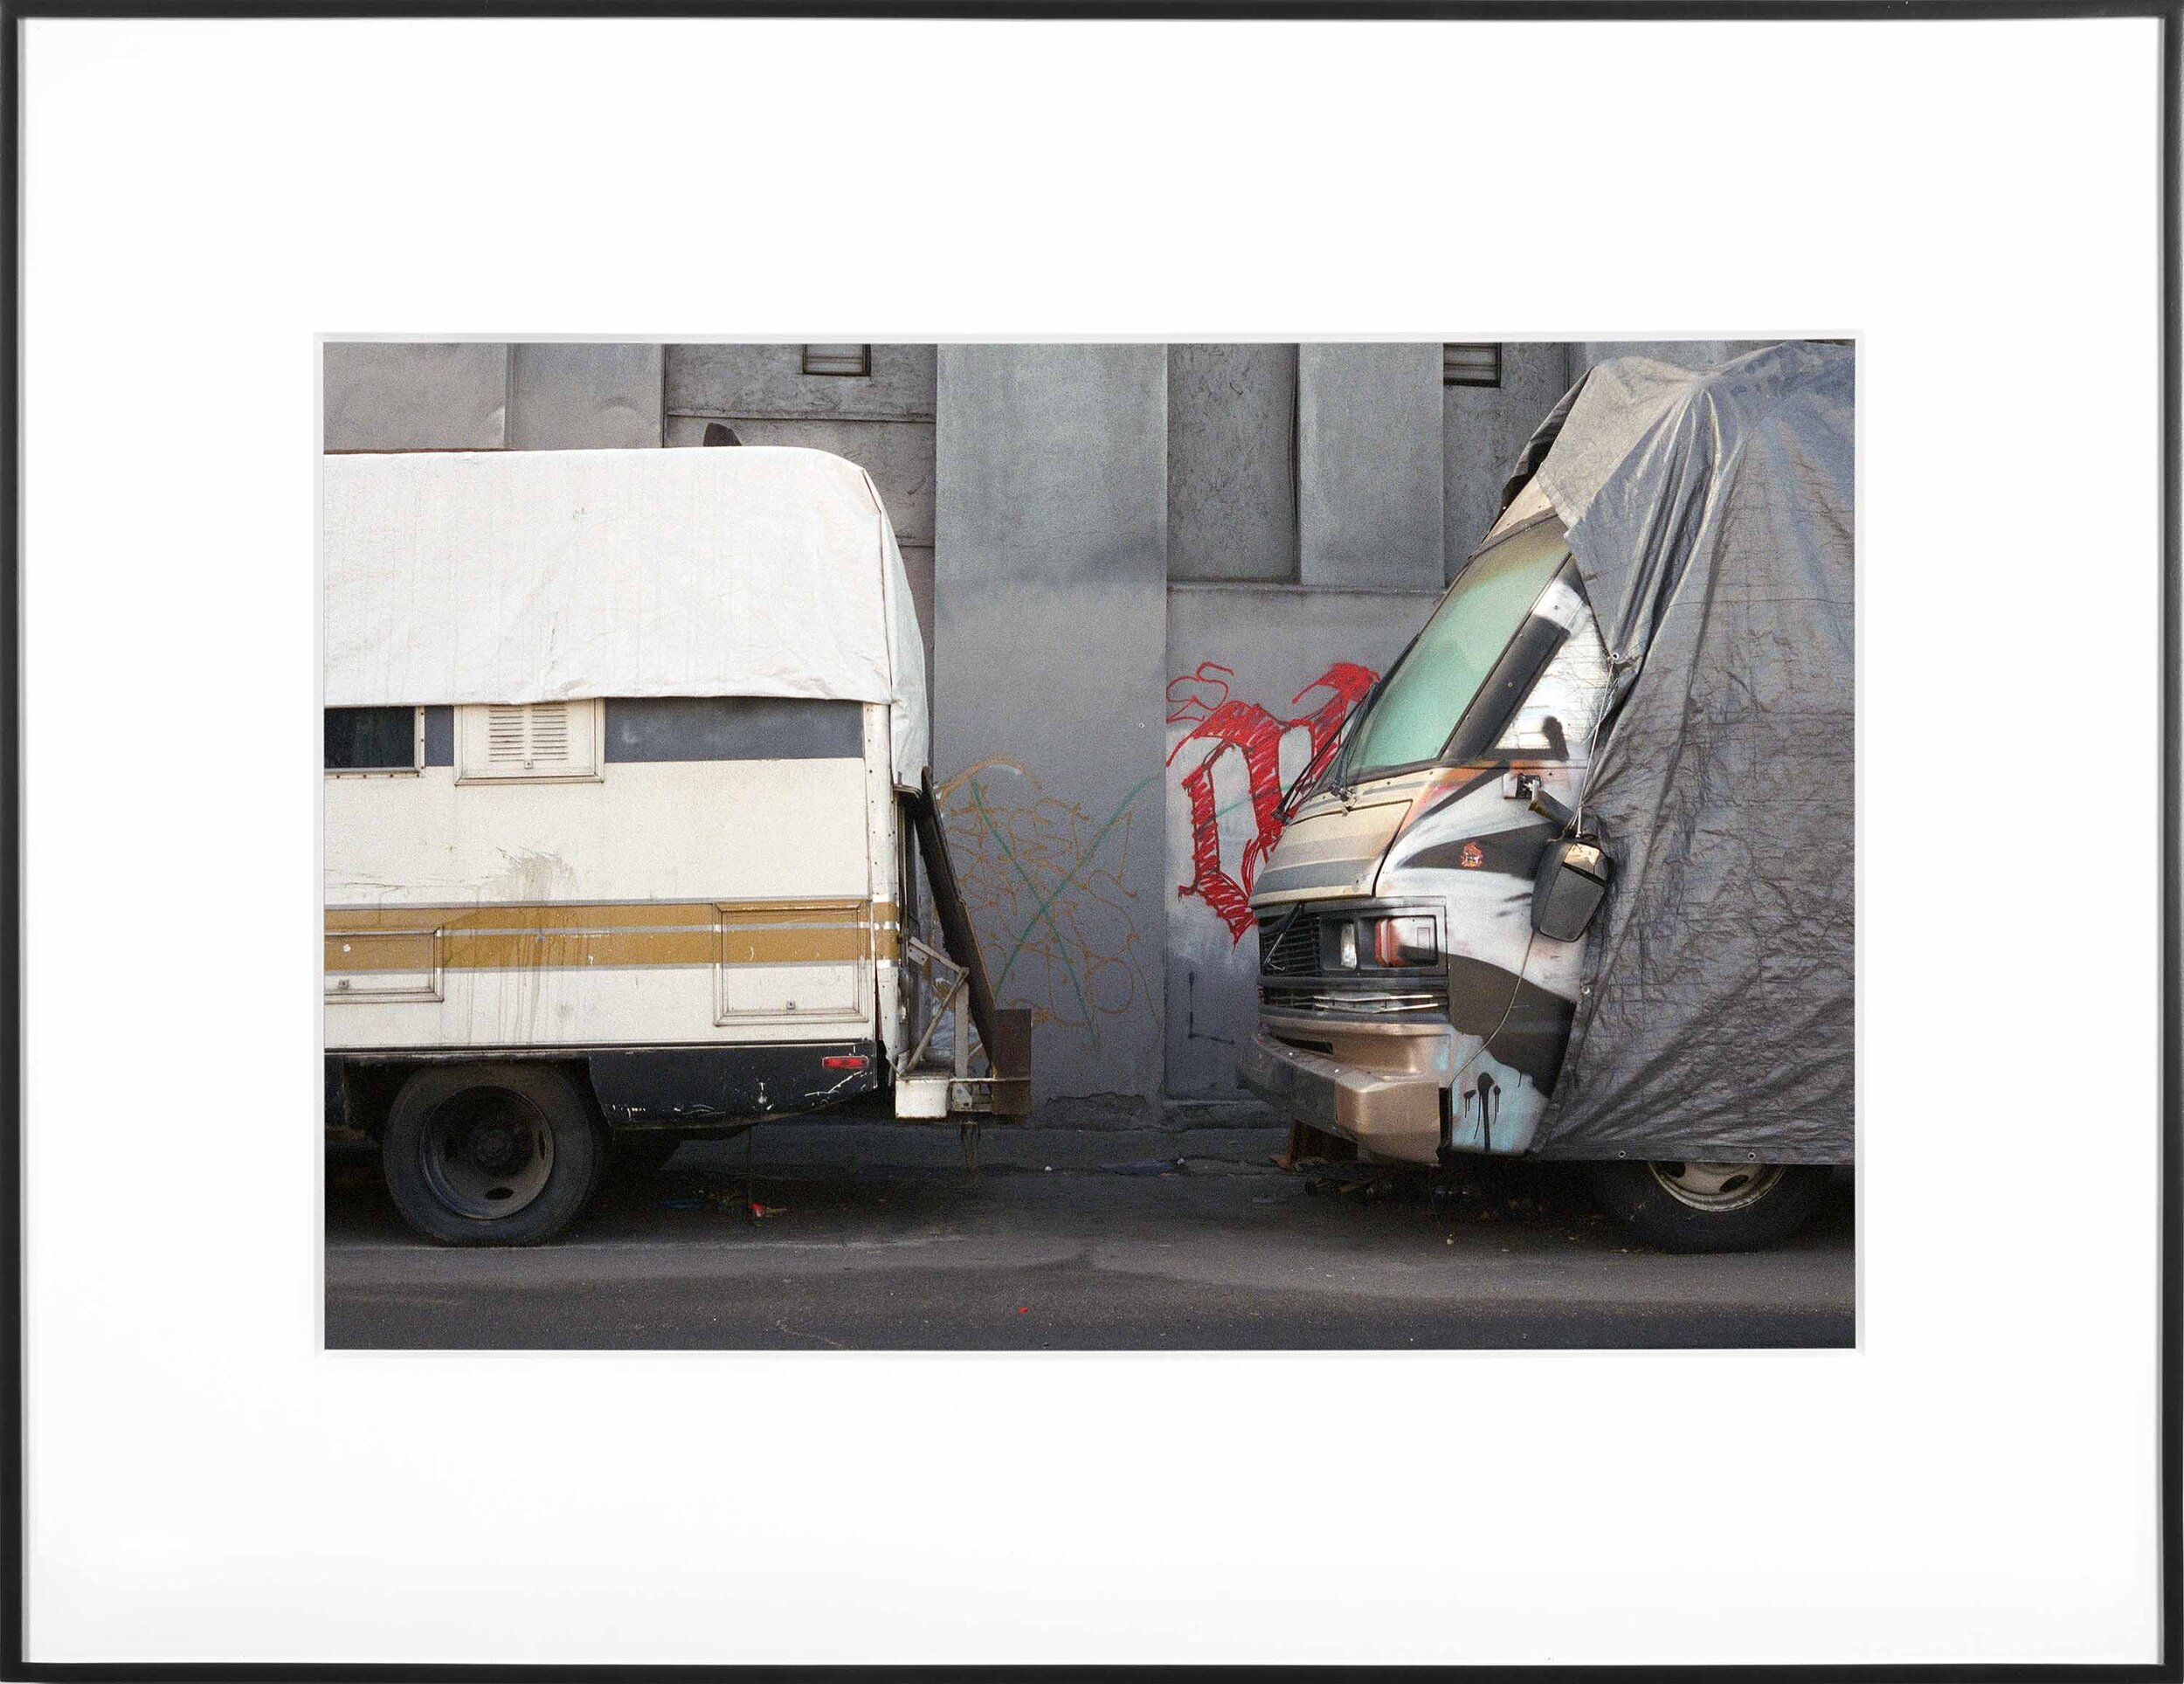   (Temporary) Homes for America: 3300 block to 4400 block, Union Pacific Avenue, between South Grande Vista Avenue and South Marianna Avenue, Los Angeles/Commerce, California, December 2020   2021  chromogenic print 11 x 15 inches 